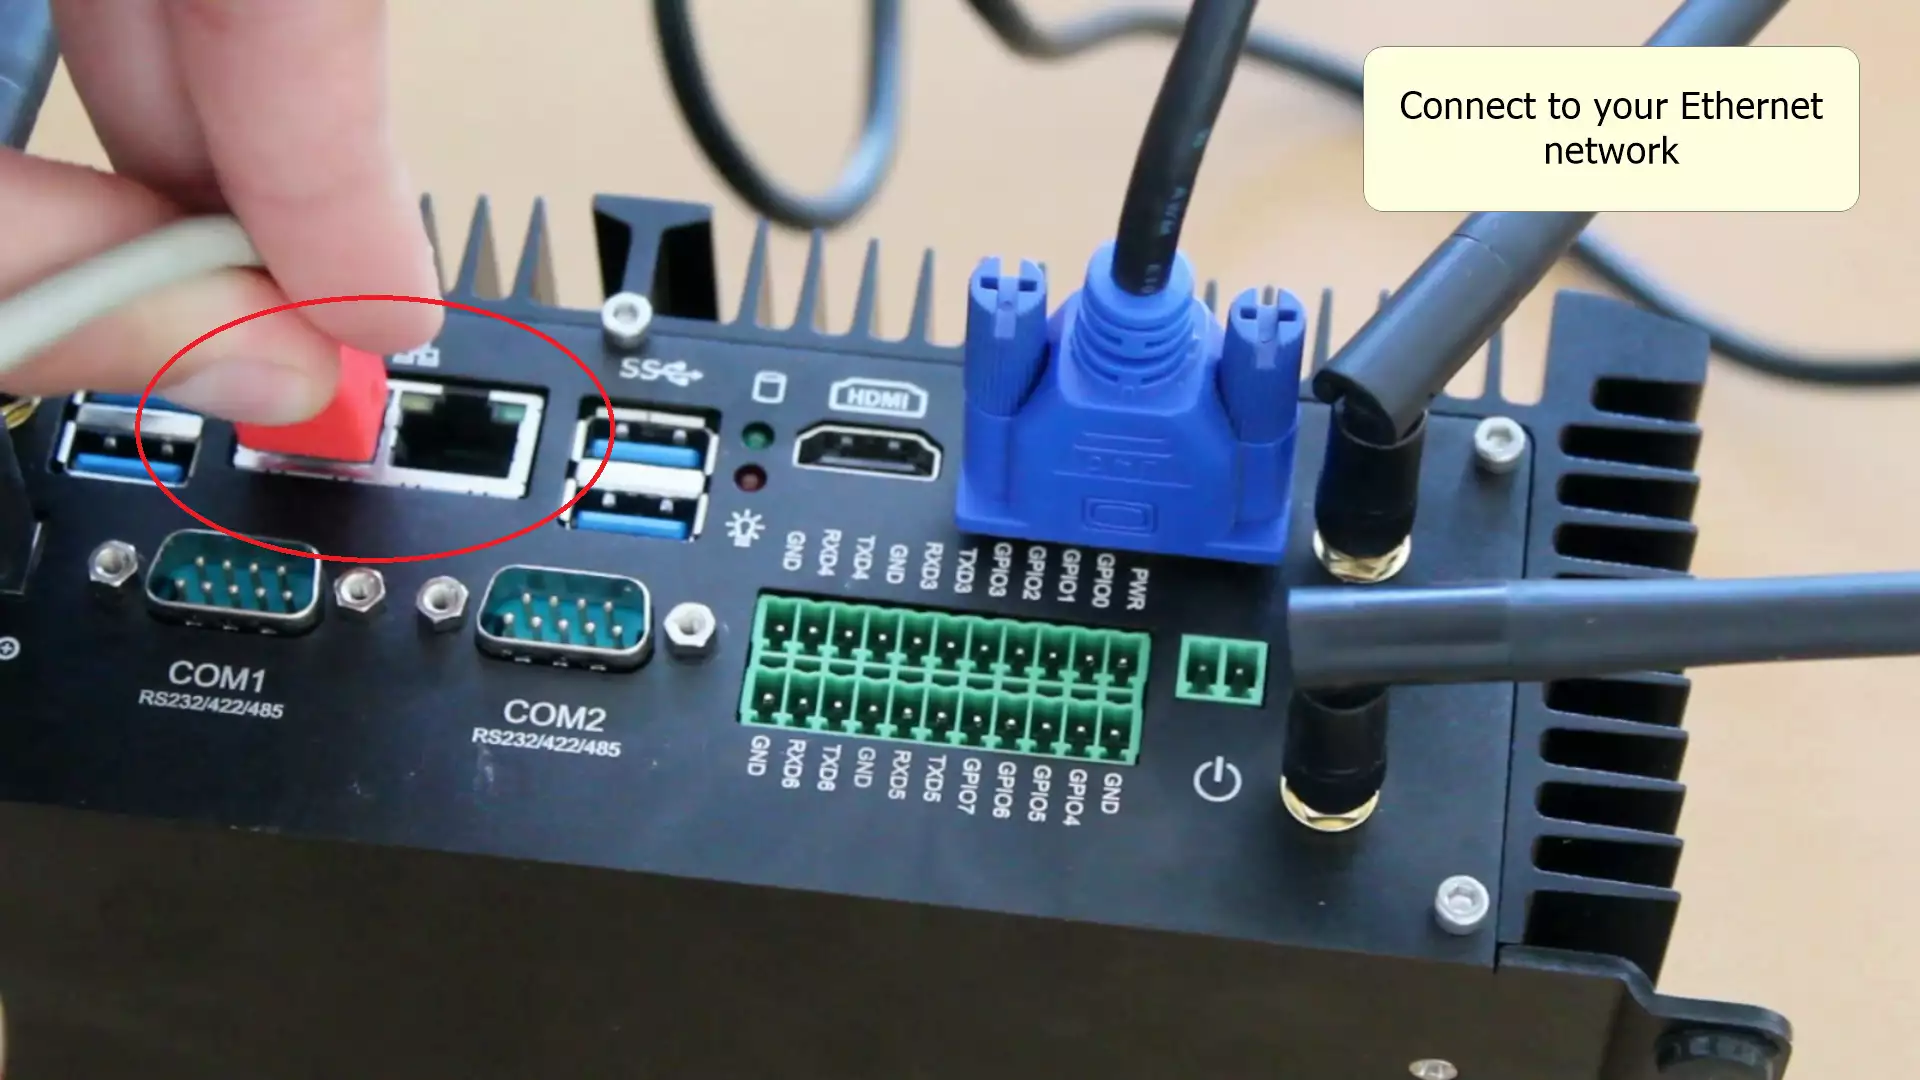 vga cable being connected to computer